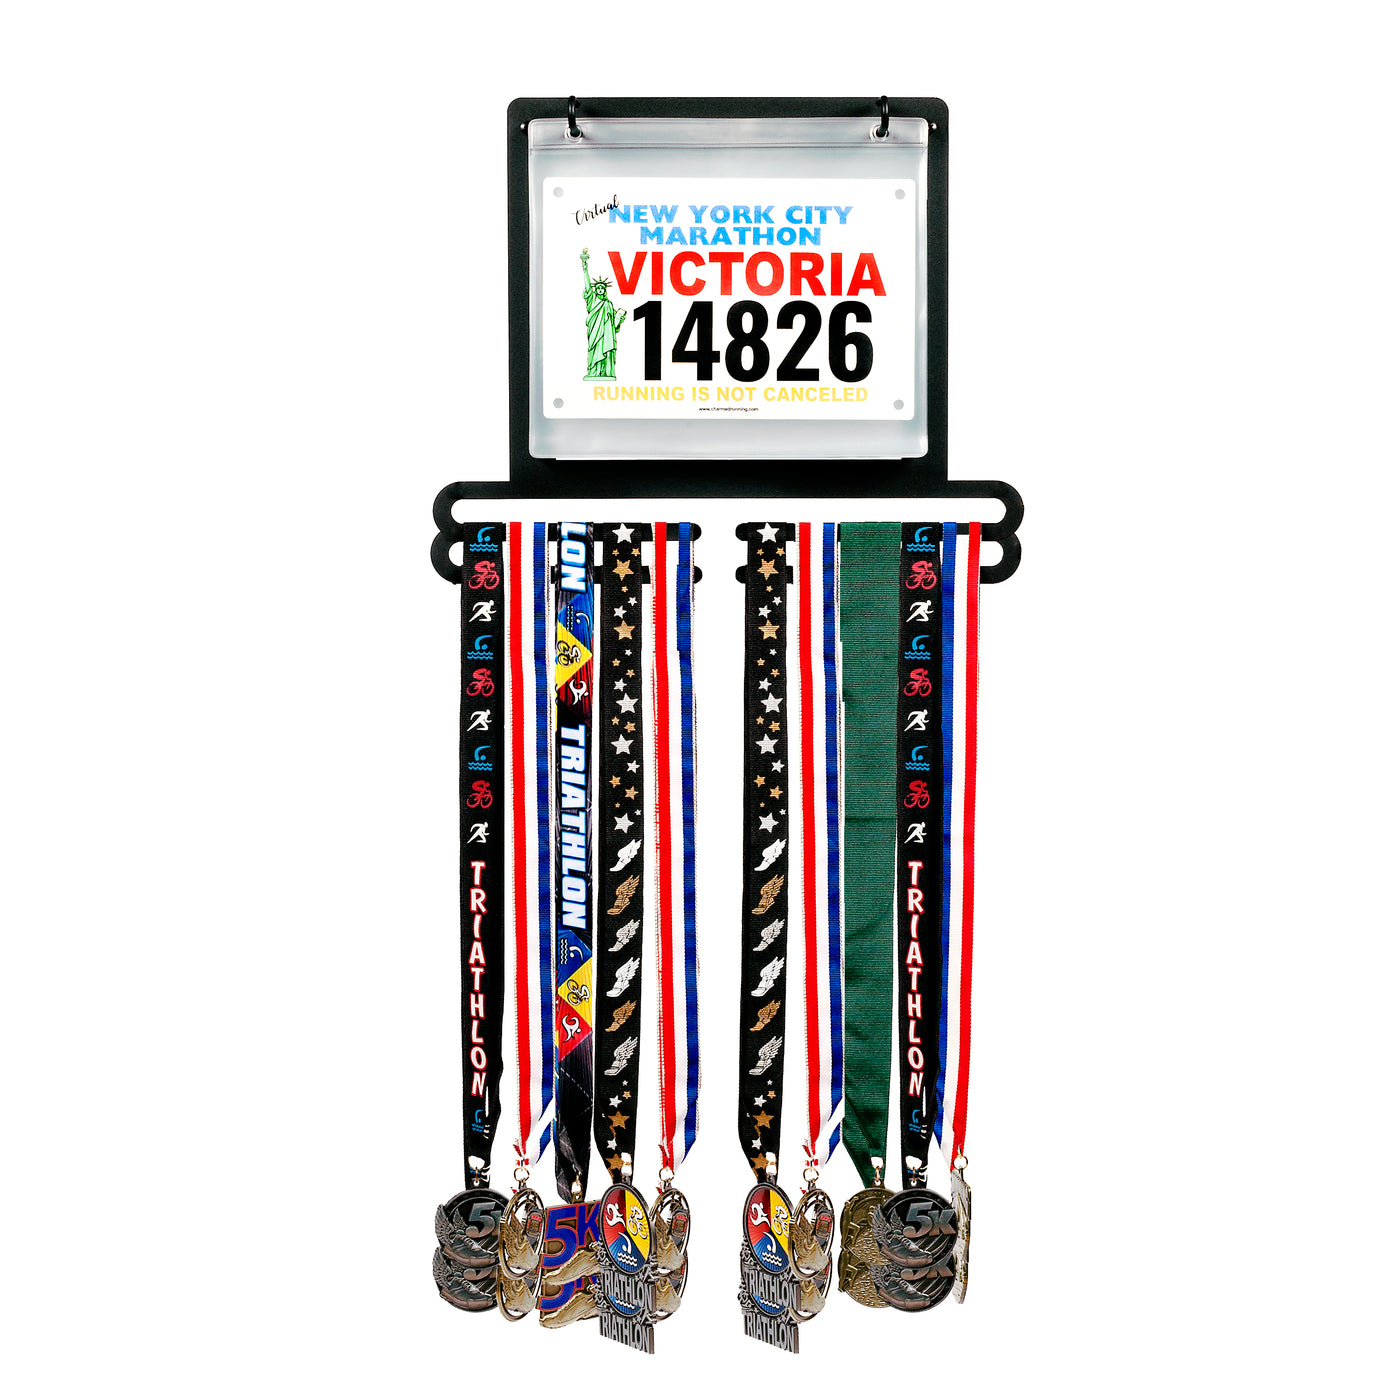 Medal Awards Rack Race Bib and Race Medal Hanger with Chalkboard, Display for Track, Marathons, Triathlons, Races, and More, Black